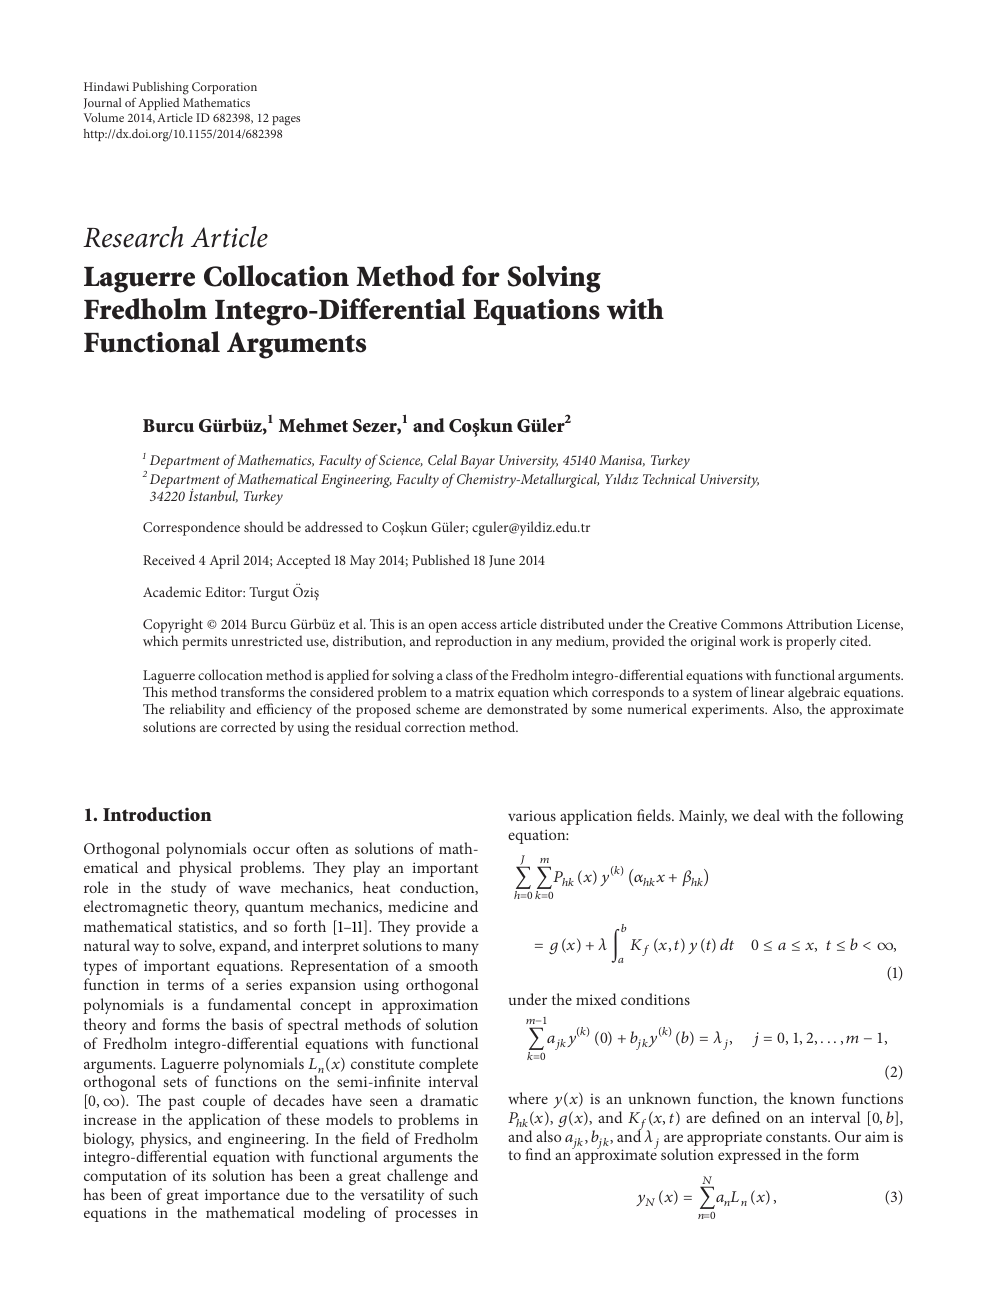 Laguerre Collocation Method For Solving Fredholm Integro Differential Equations With Functional Arguments Topic Of Research Paper In Mathematics Download Scholarly Article Pdf And Read For Free On Cyberleninka Open Science Hub